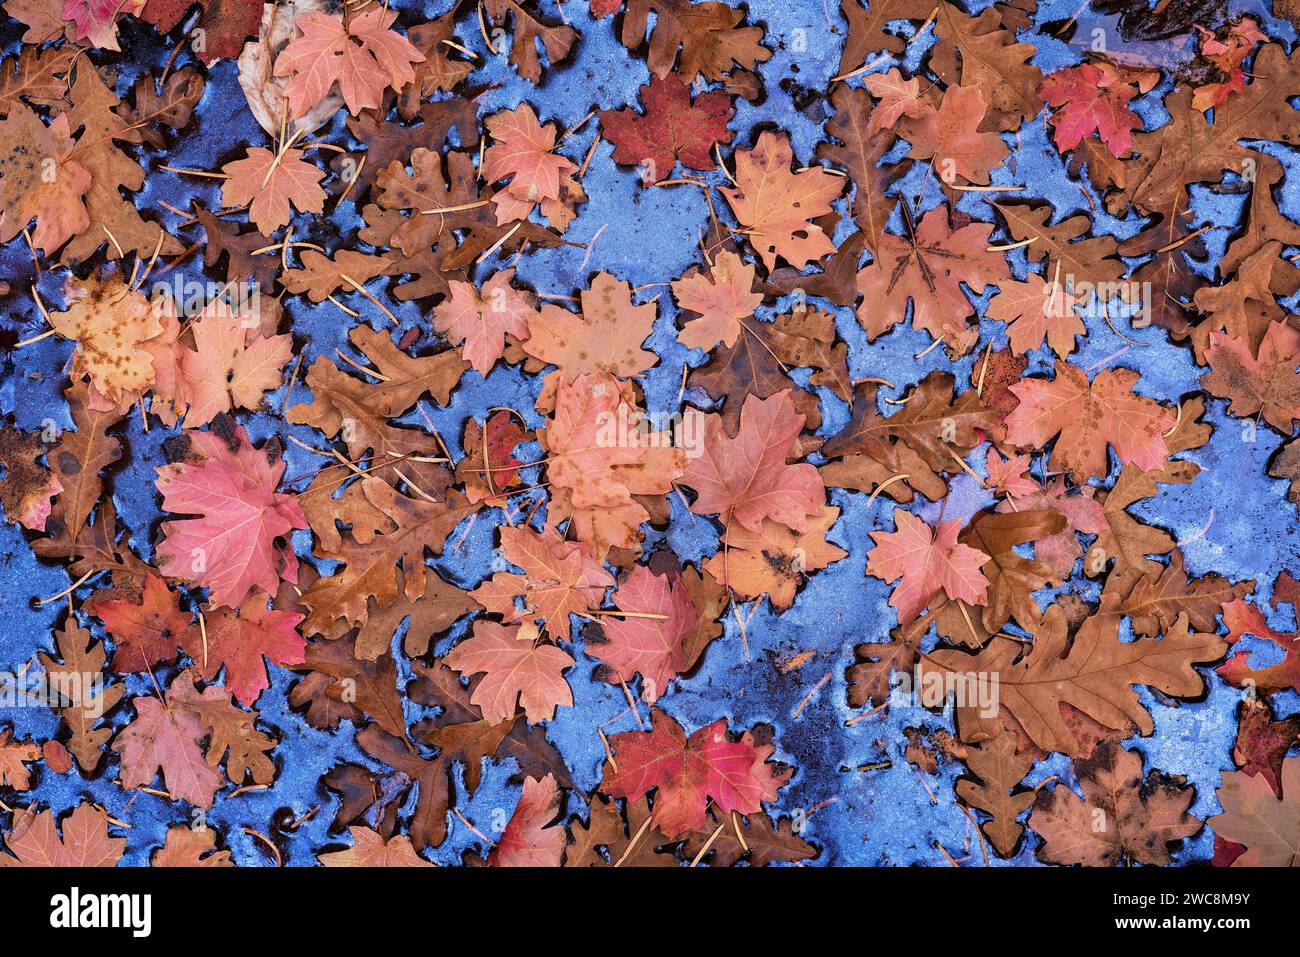 Colorful autumn leaves resting on water with blue sky reflected in Zion National Park, Utah Stock Photo